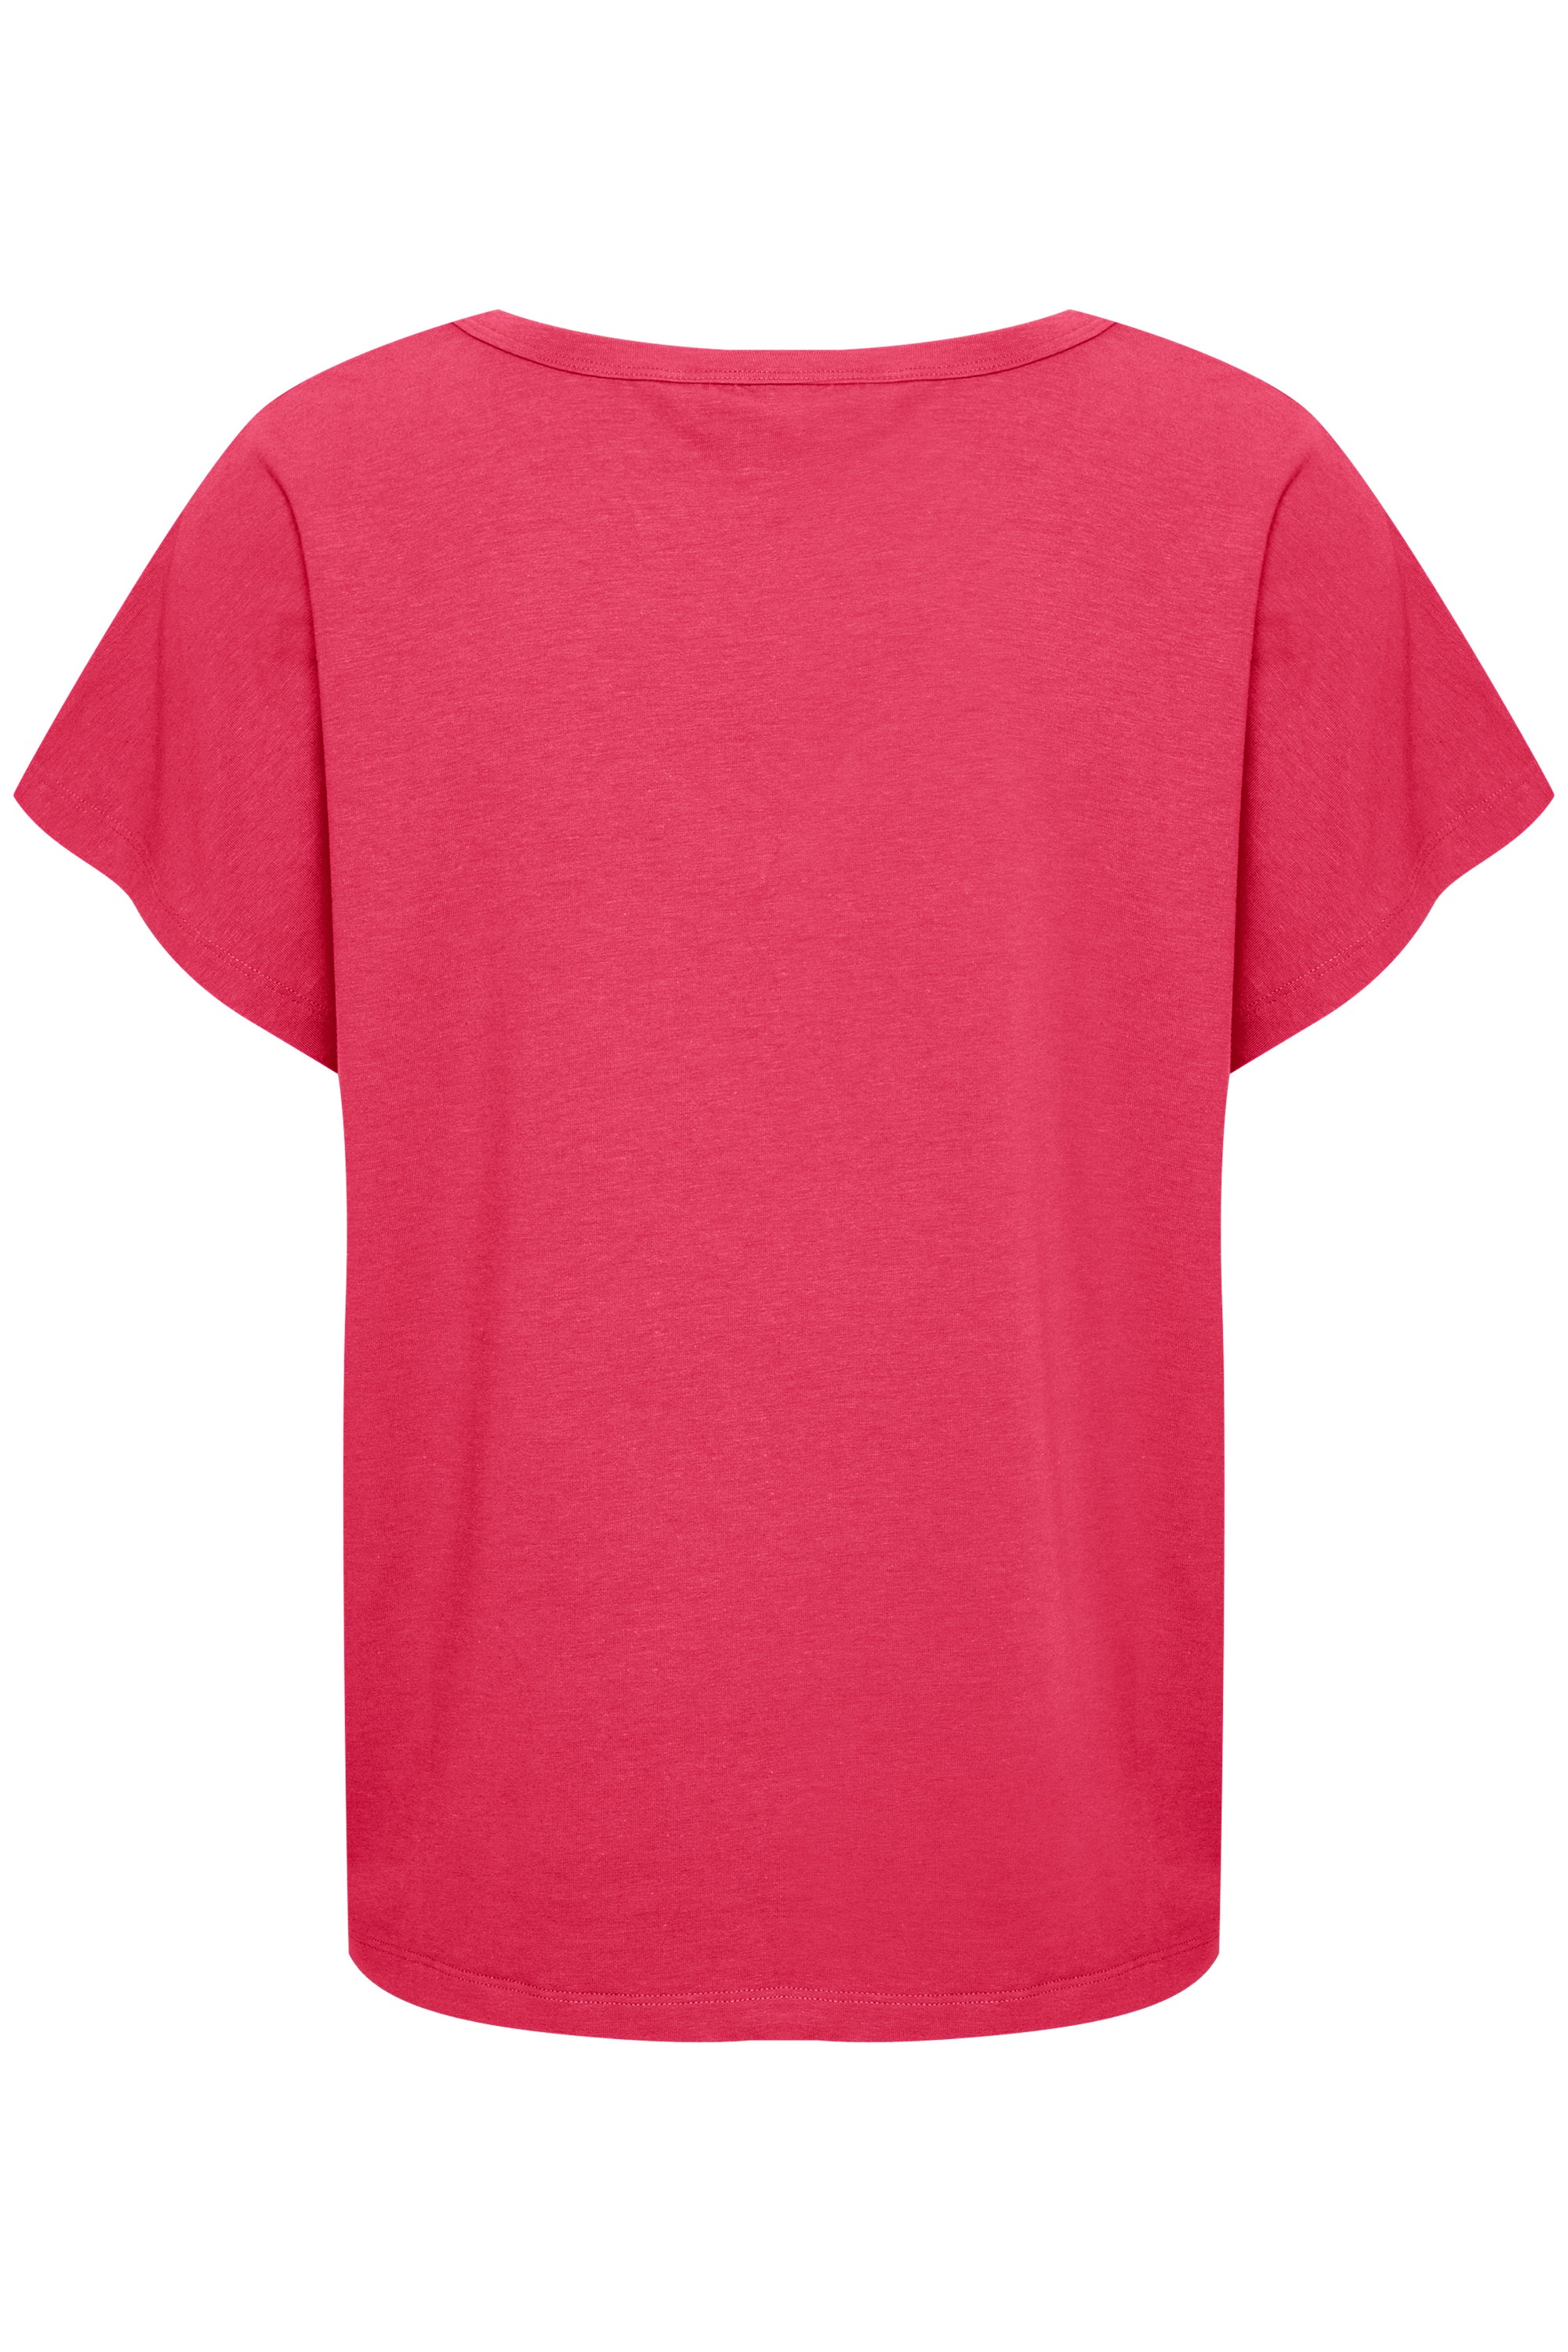 Evenye t-shirt claret red - Part Two